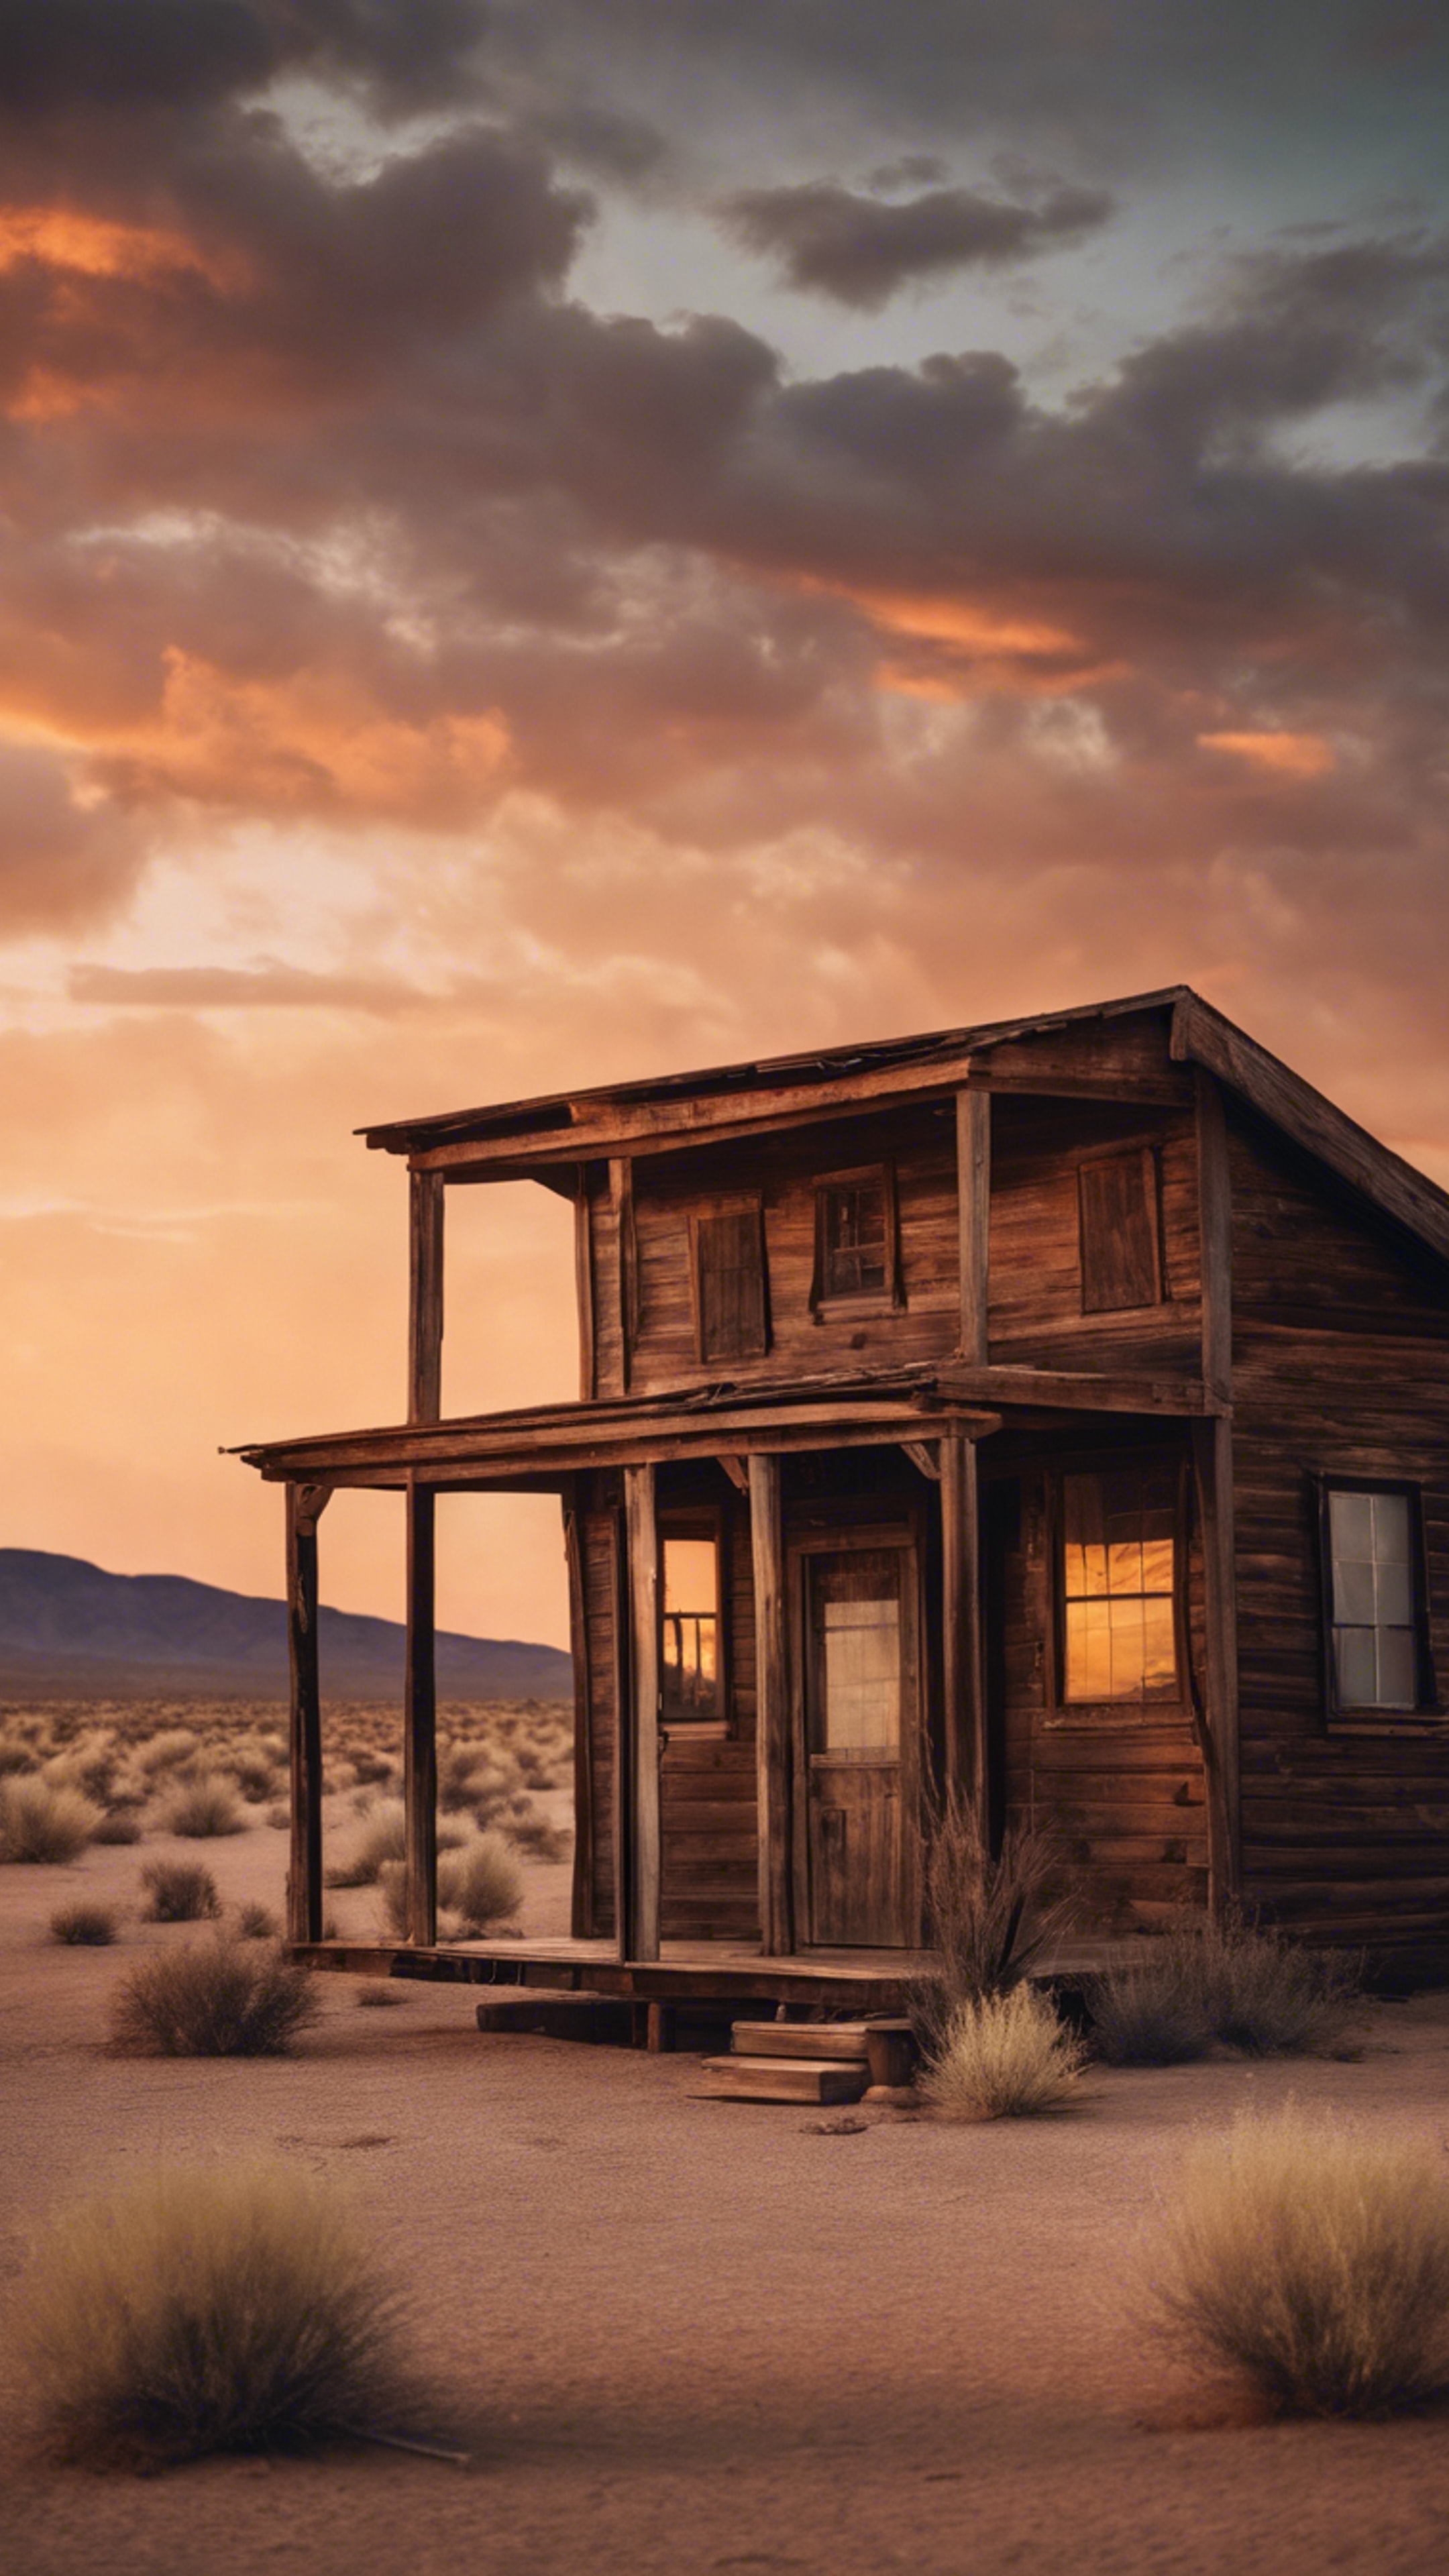 A dust-swept desert scene with a lone cabin standing resiliently during a blazing sunset in the wild west. Обои[55ae6b4a2ff440e59218]